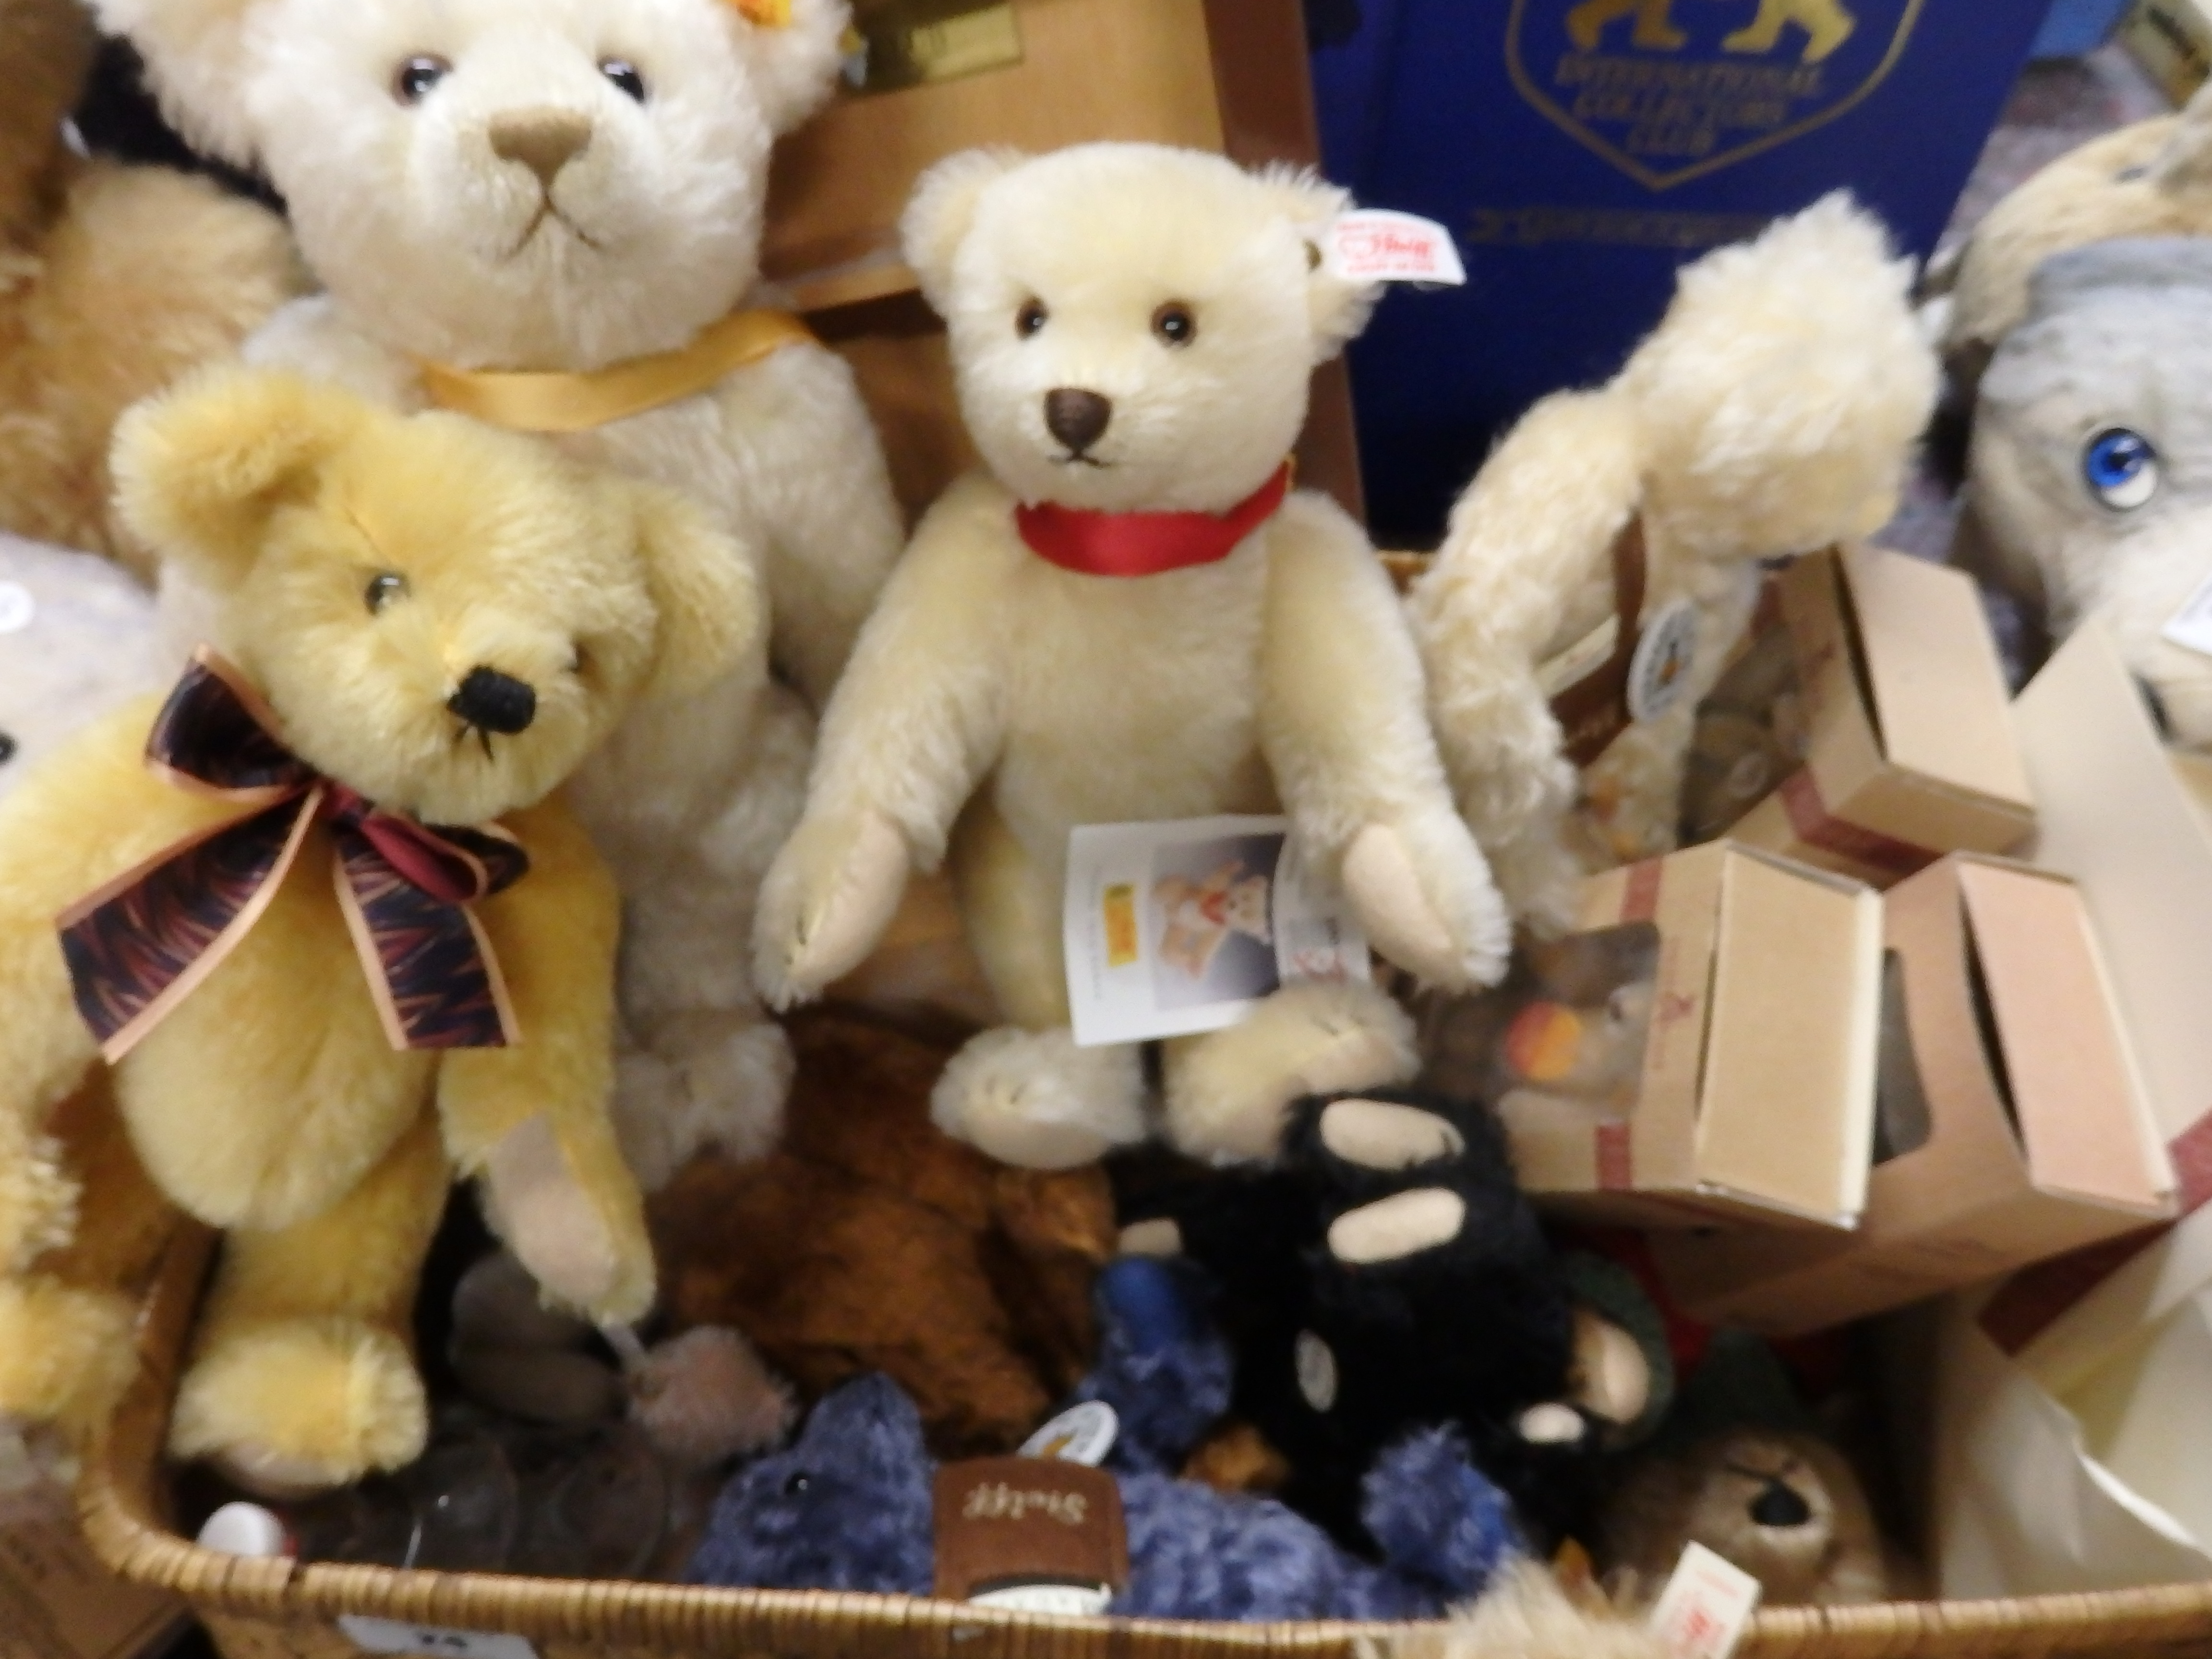 Collection of Steiff bears